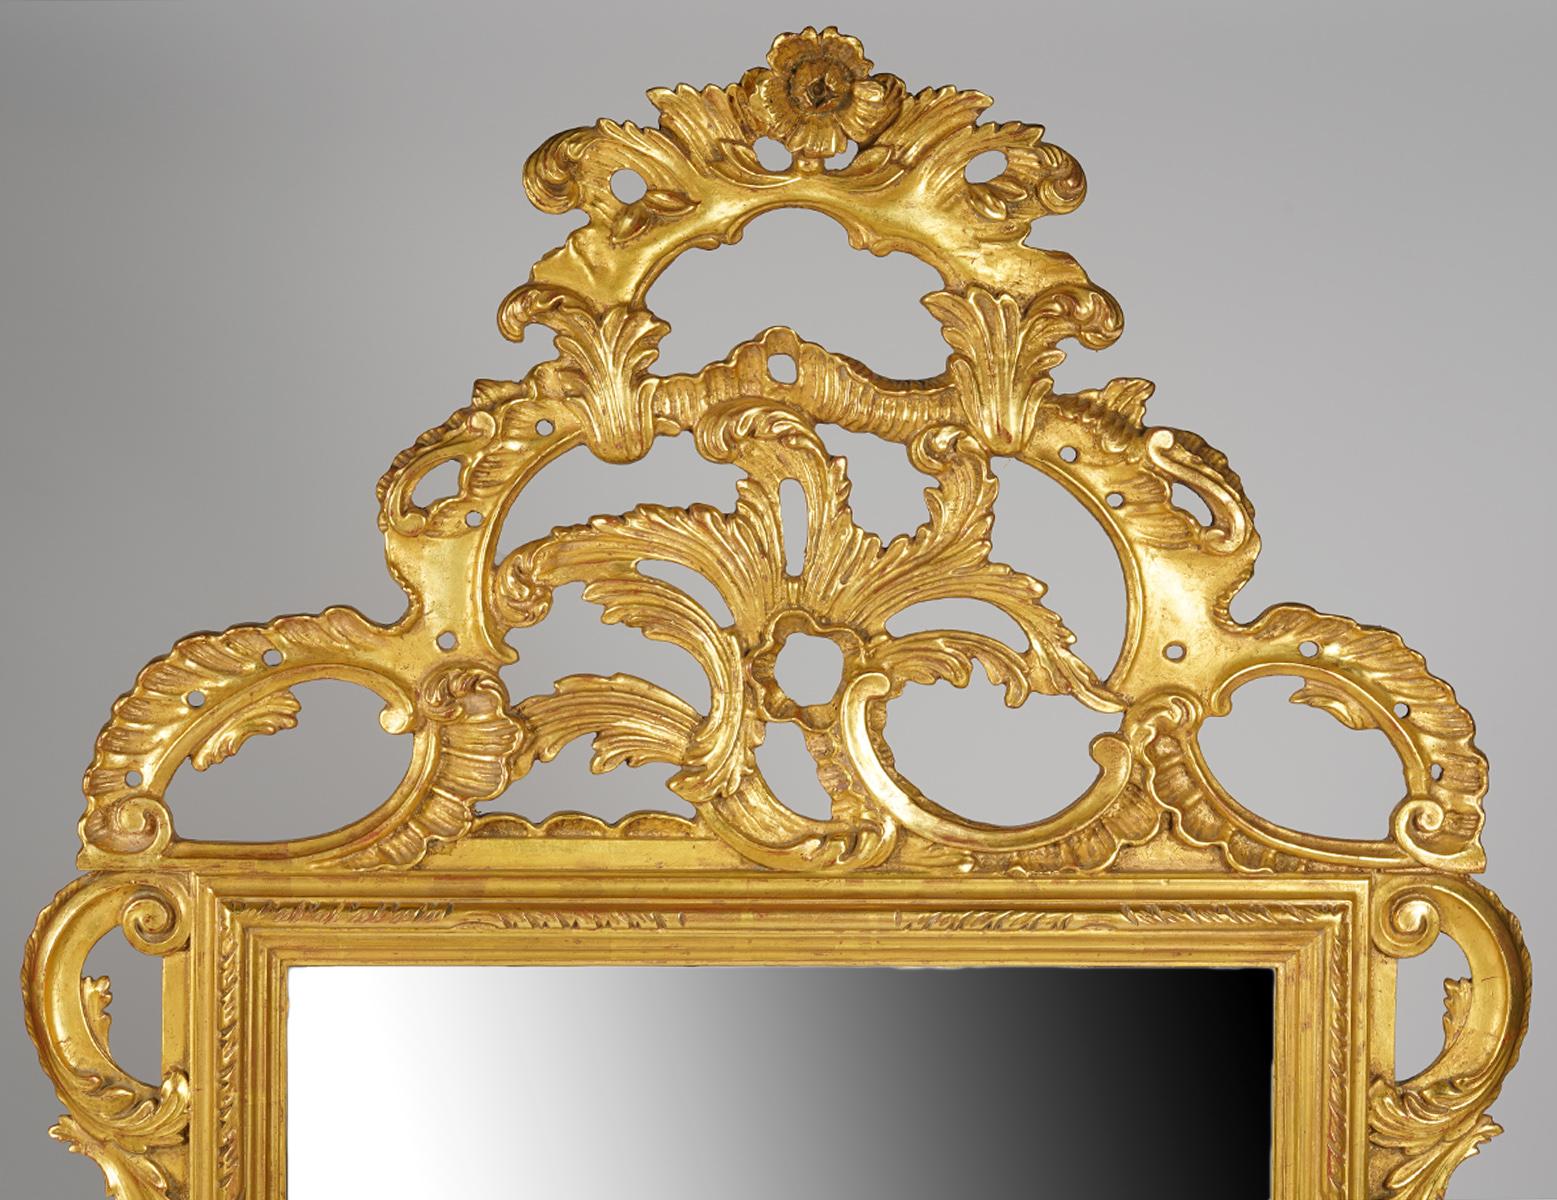 This elaborately carved giltwood mirror by Palladio dates to the mid-20th century and is fashioned in the rococo style with impressing foliate scrolls centering a rose at the very top. The quality of the gilt is superior with a comnination of high